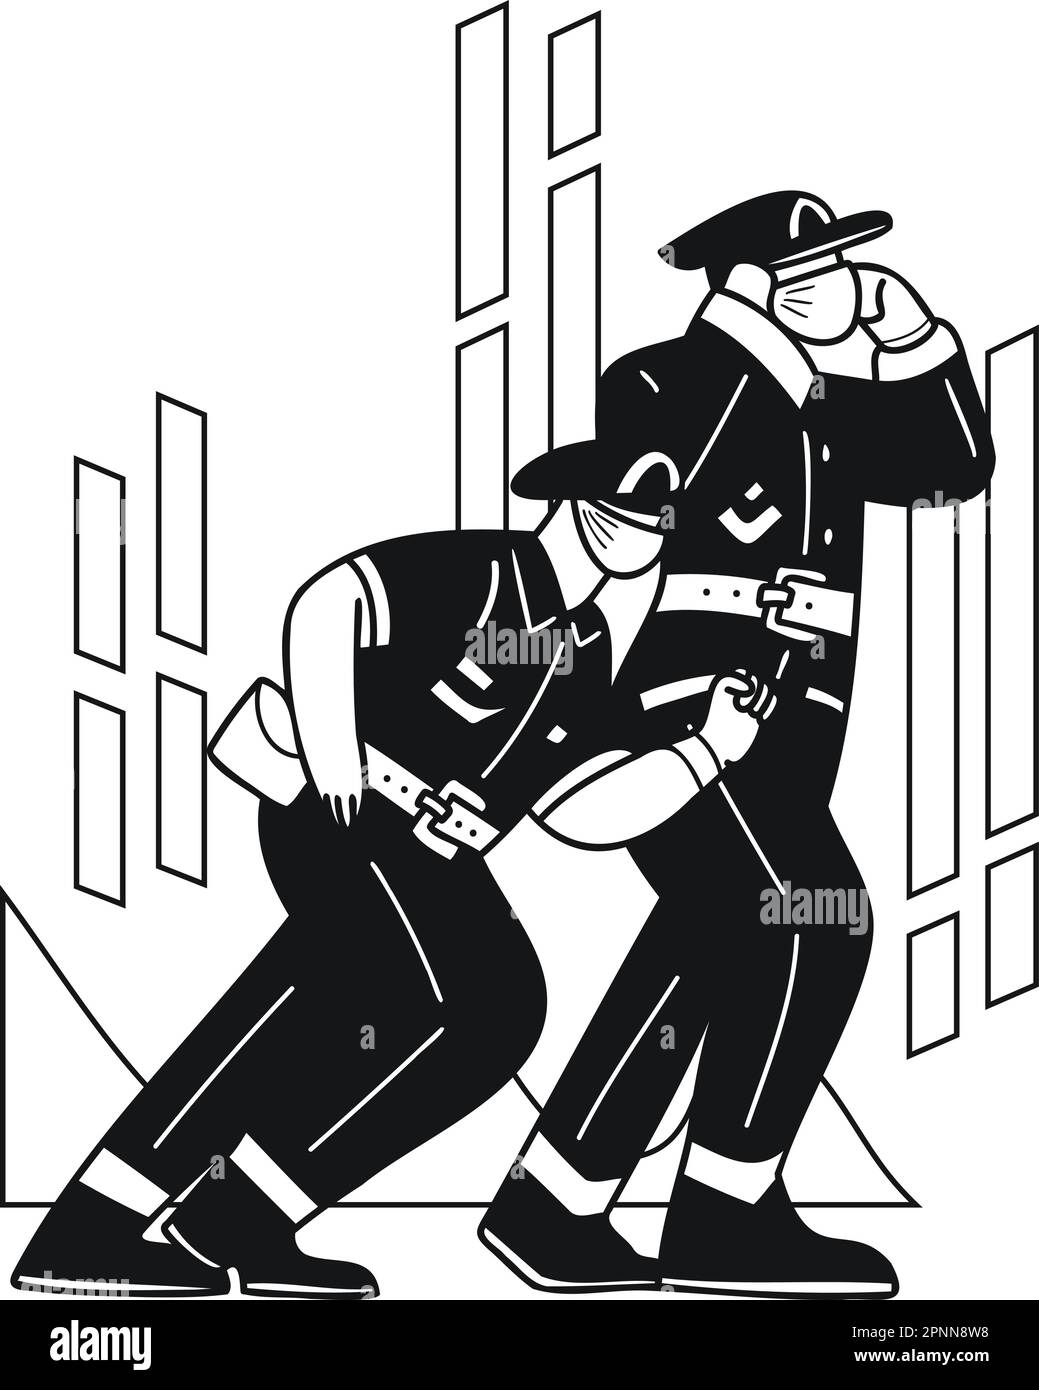 The police are catching criminals illustration in doodle style isolated on background Stock Vector